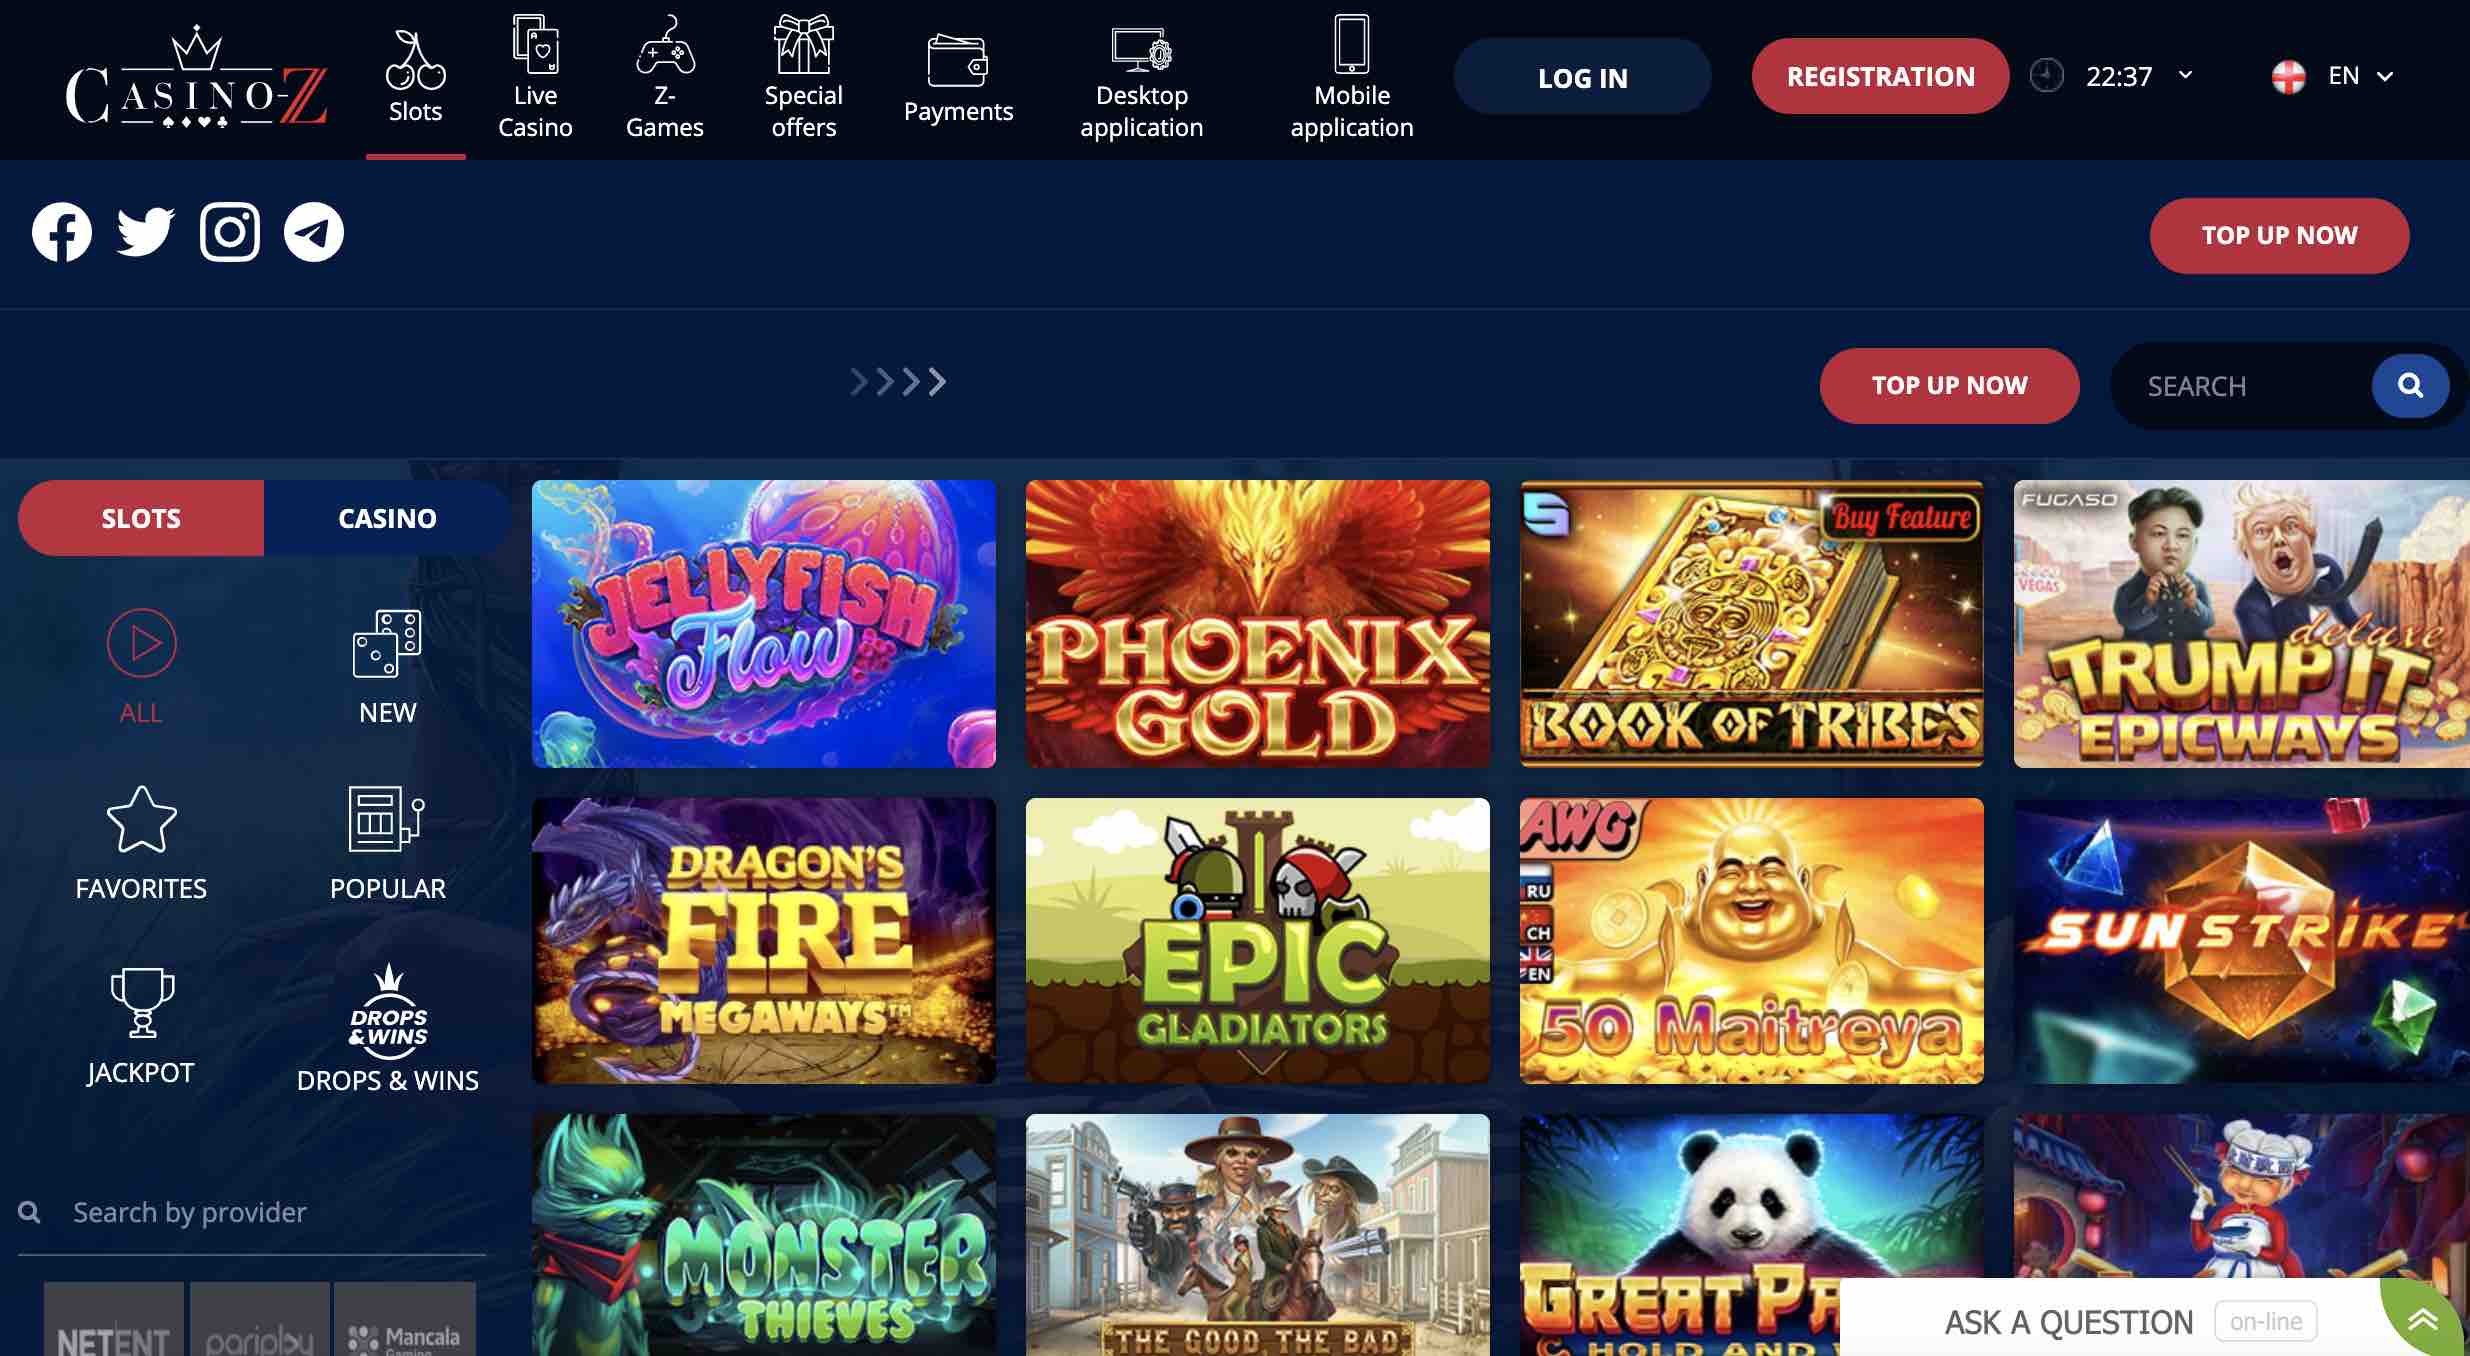 Play the Best Casino Games at Casino Z